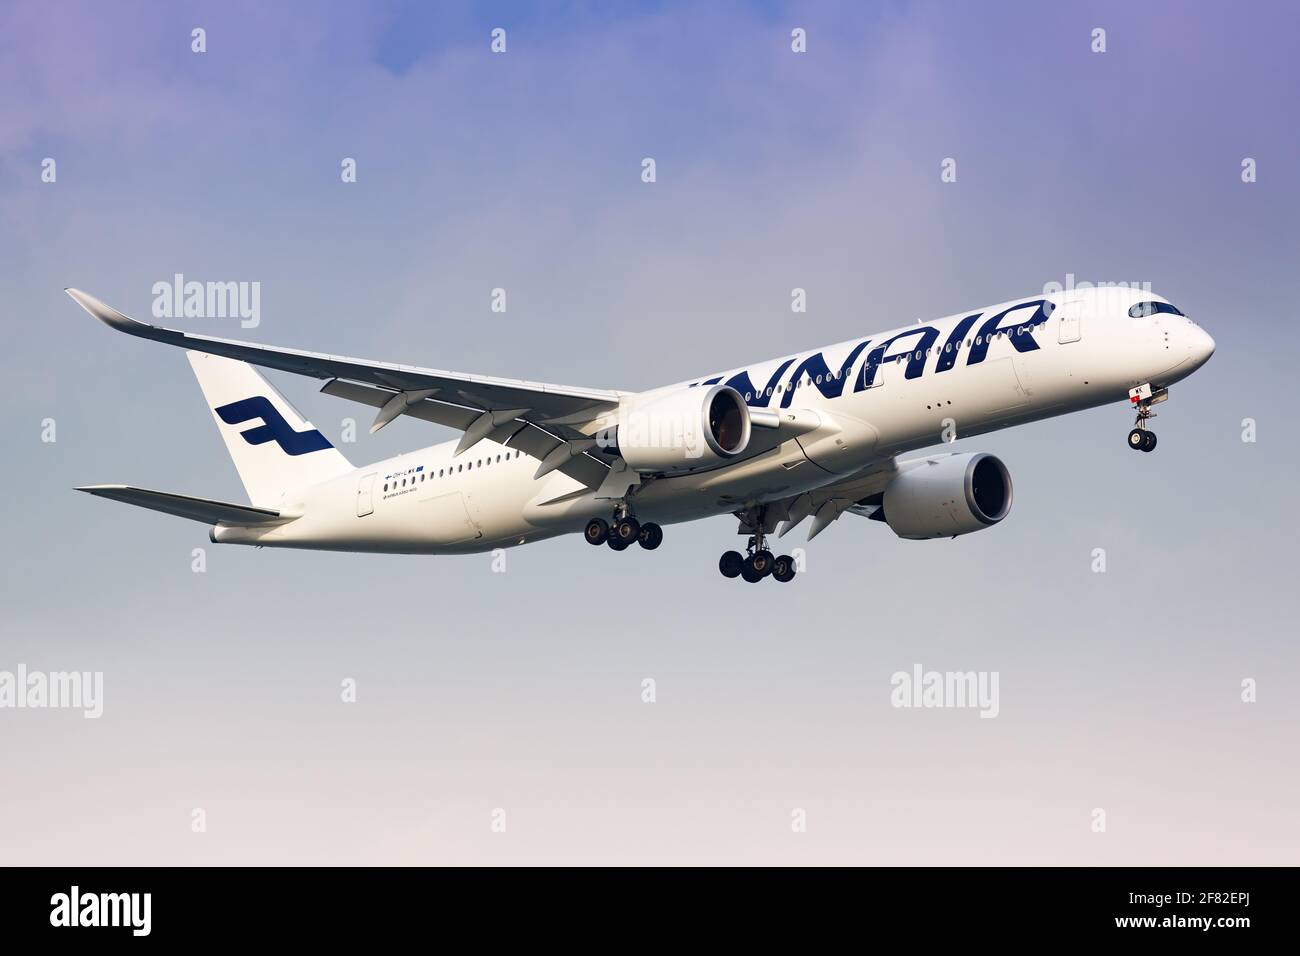 Changi, Singapore – January 29, 2018: Finnair Airbus A350 airplane at Changi airport (SIN) in Singapore. Airbus is a European aircraft manufacturer ba Stock Photo